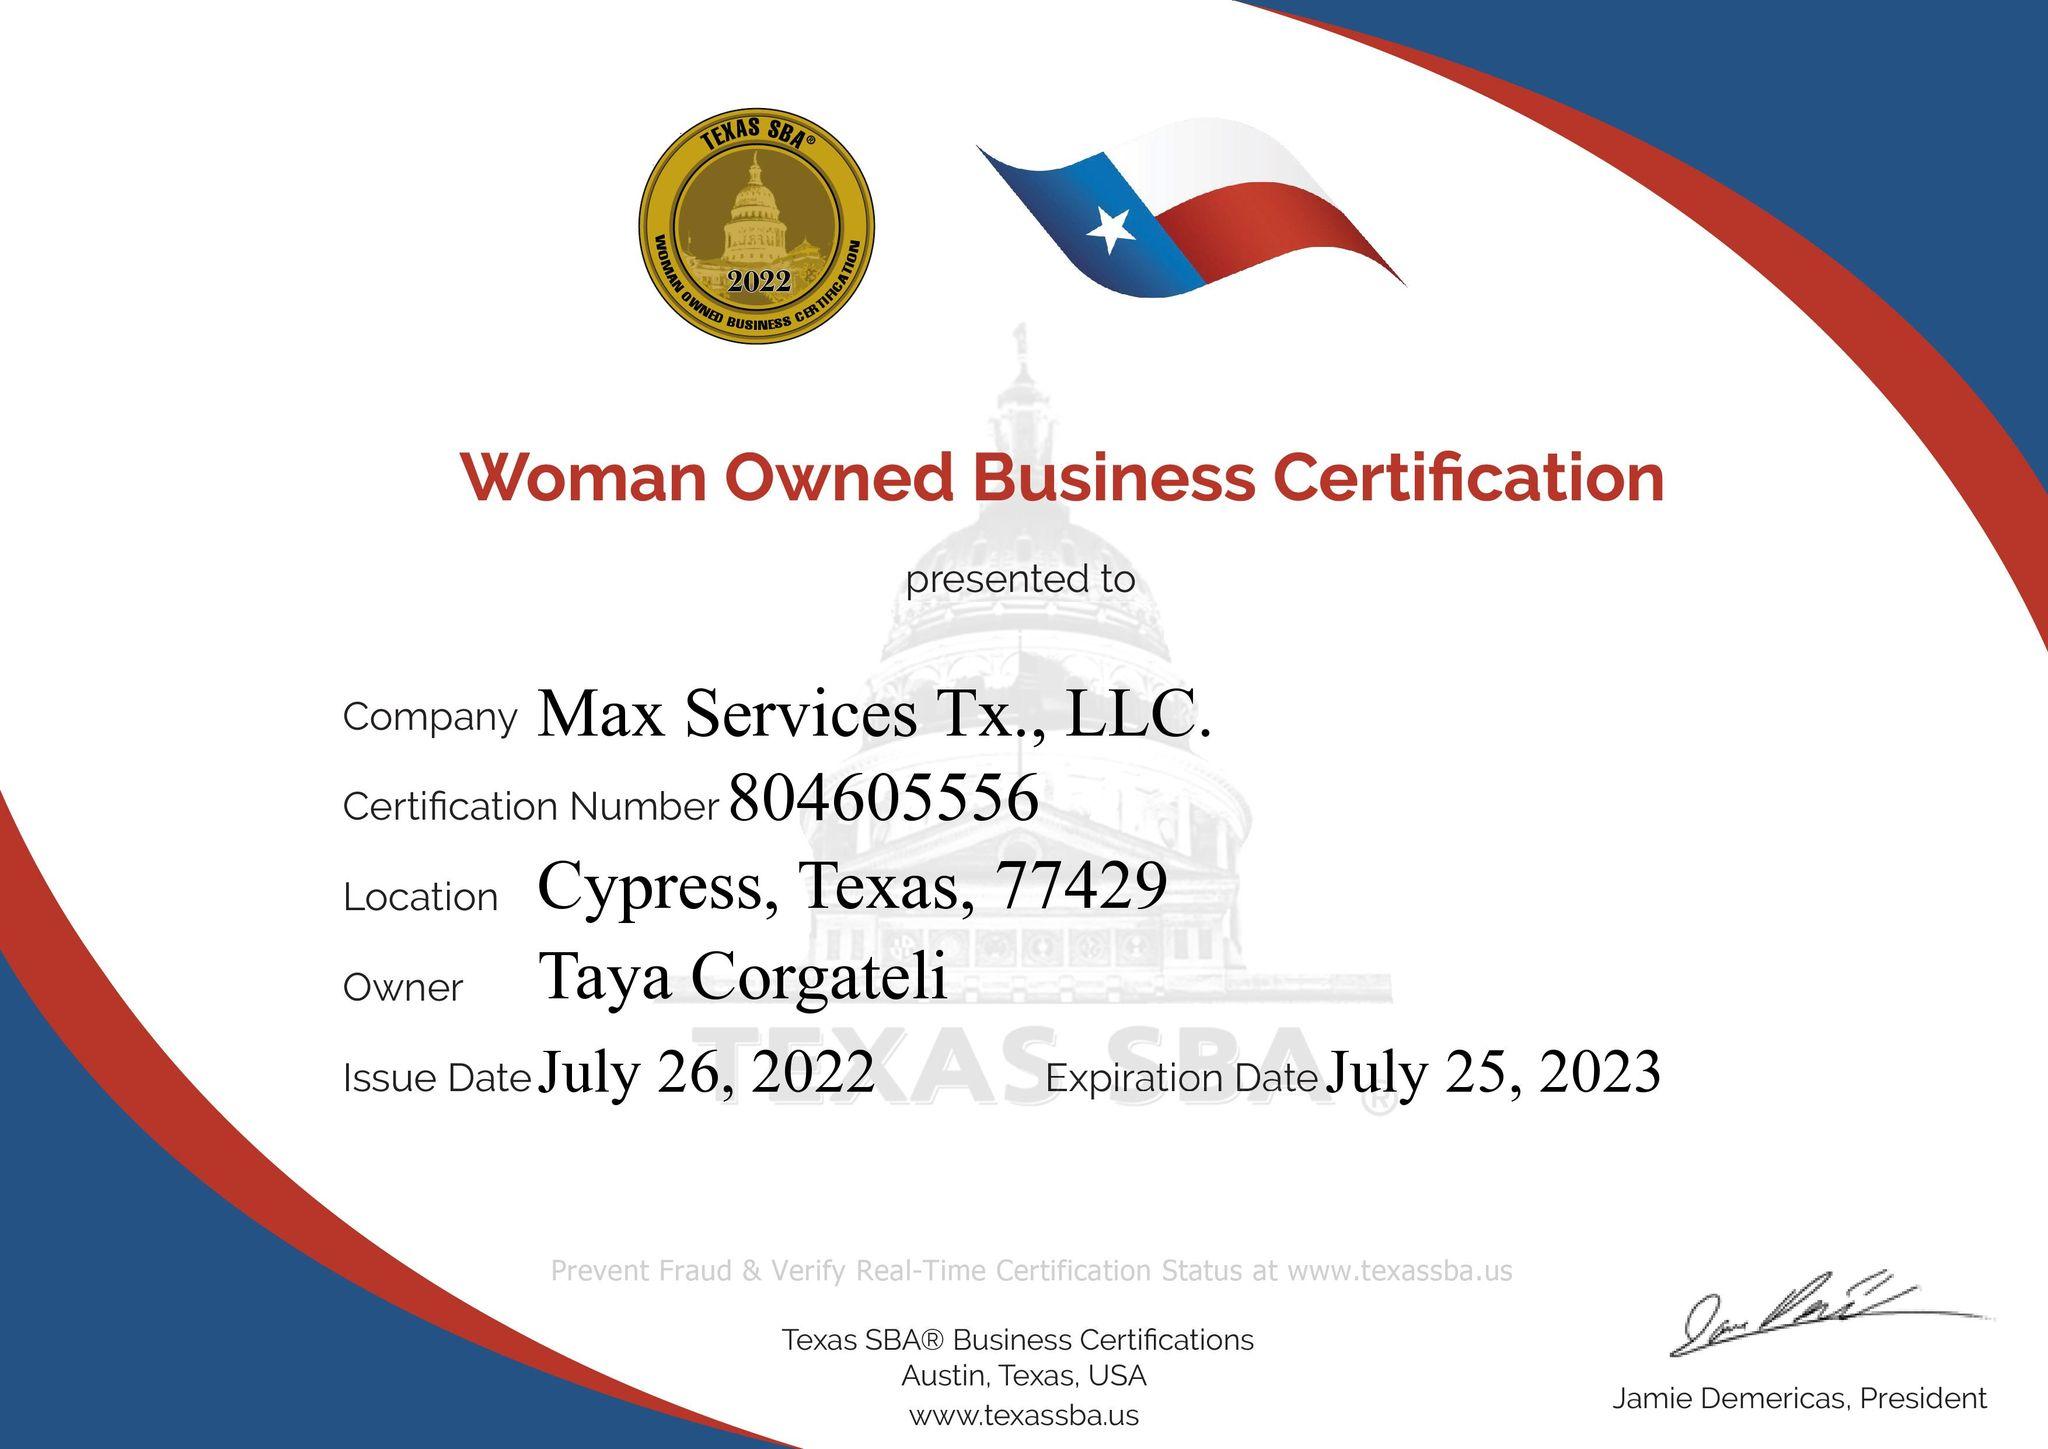 Official Woman Owned Business Certification awarded to Max Services Tx., LLC by Texas SBA, with a valid date from July 26, 2022, to July 25, 2023, featuring the Texas Capitol and the Texas flag. Water Damage Restoration in Spring TX Water Damage Repair Water Damage Repair Services in Spring TX Water Damage Restoration Water Damage Restoration Near Me Local Water Damage Repair Water Damage Restoration Service Water Mitigation Services Water Damage Restoration Company Water Restoration Service Provider